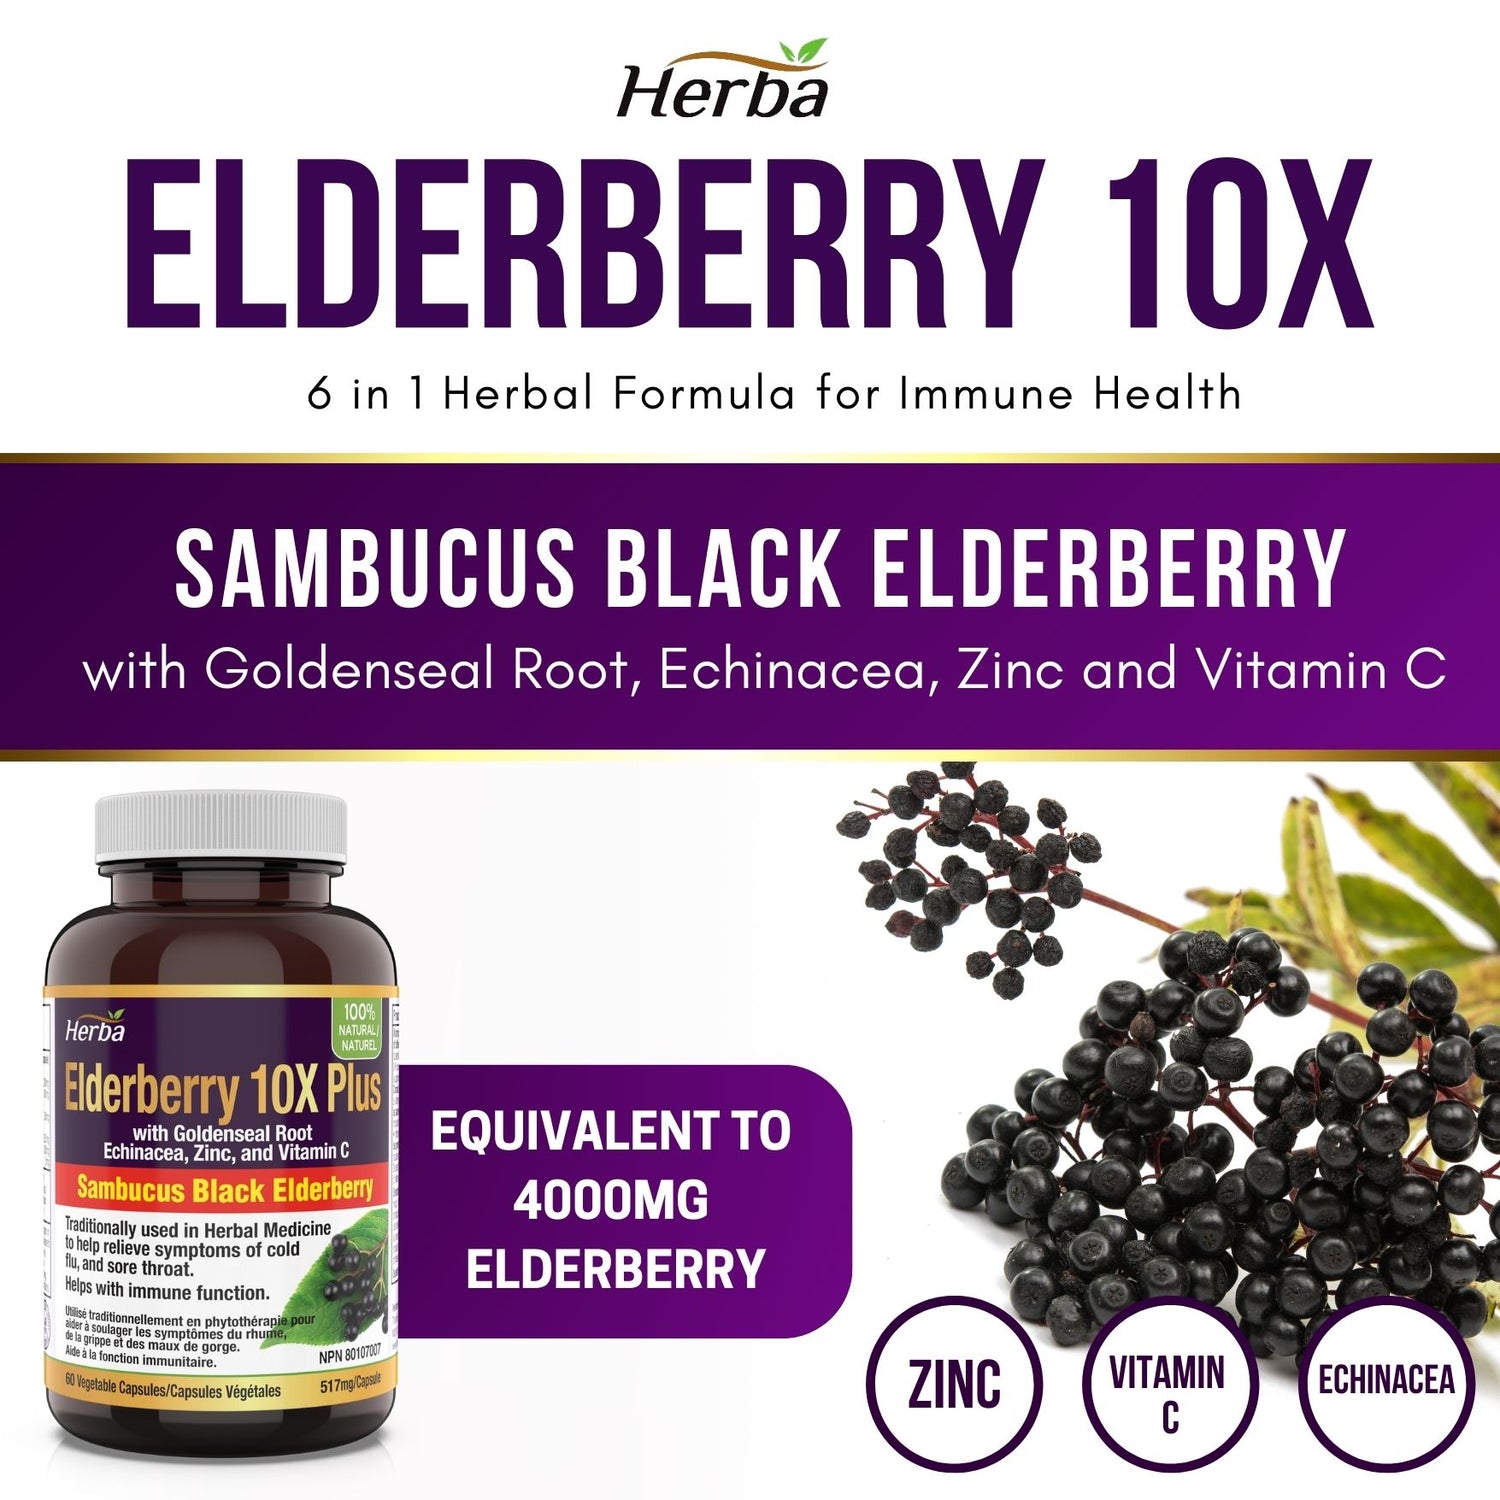 Sambucus Black Elderberry Capsules – 2,000mg Equivalent | 10:1 Extract with Echinacea and Goldenseal Root, Vitamin C, and Zinc